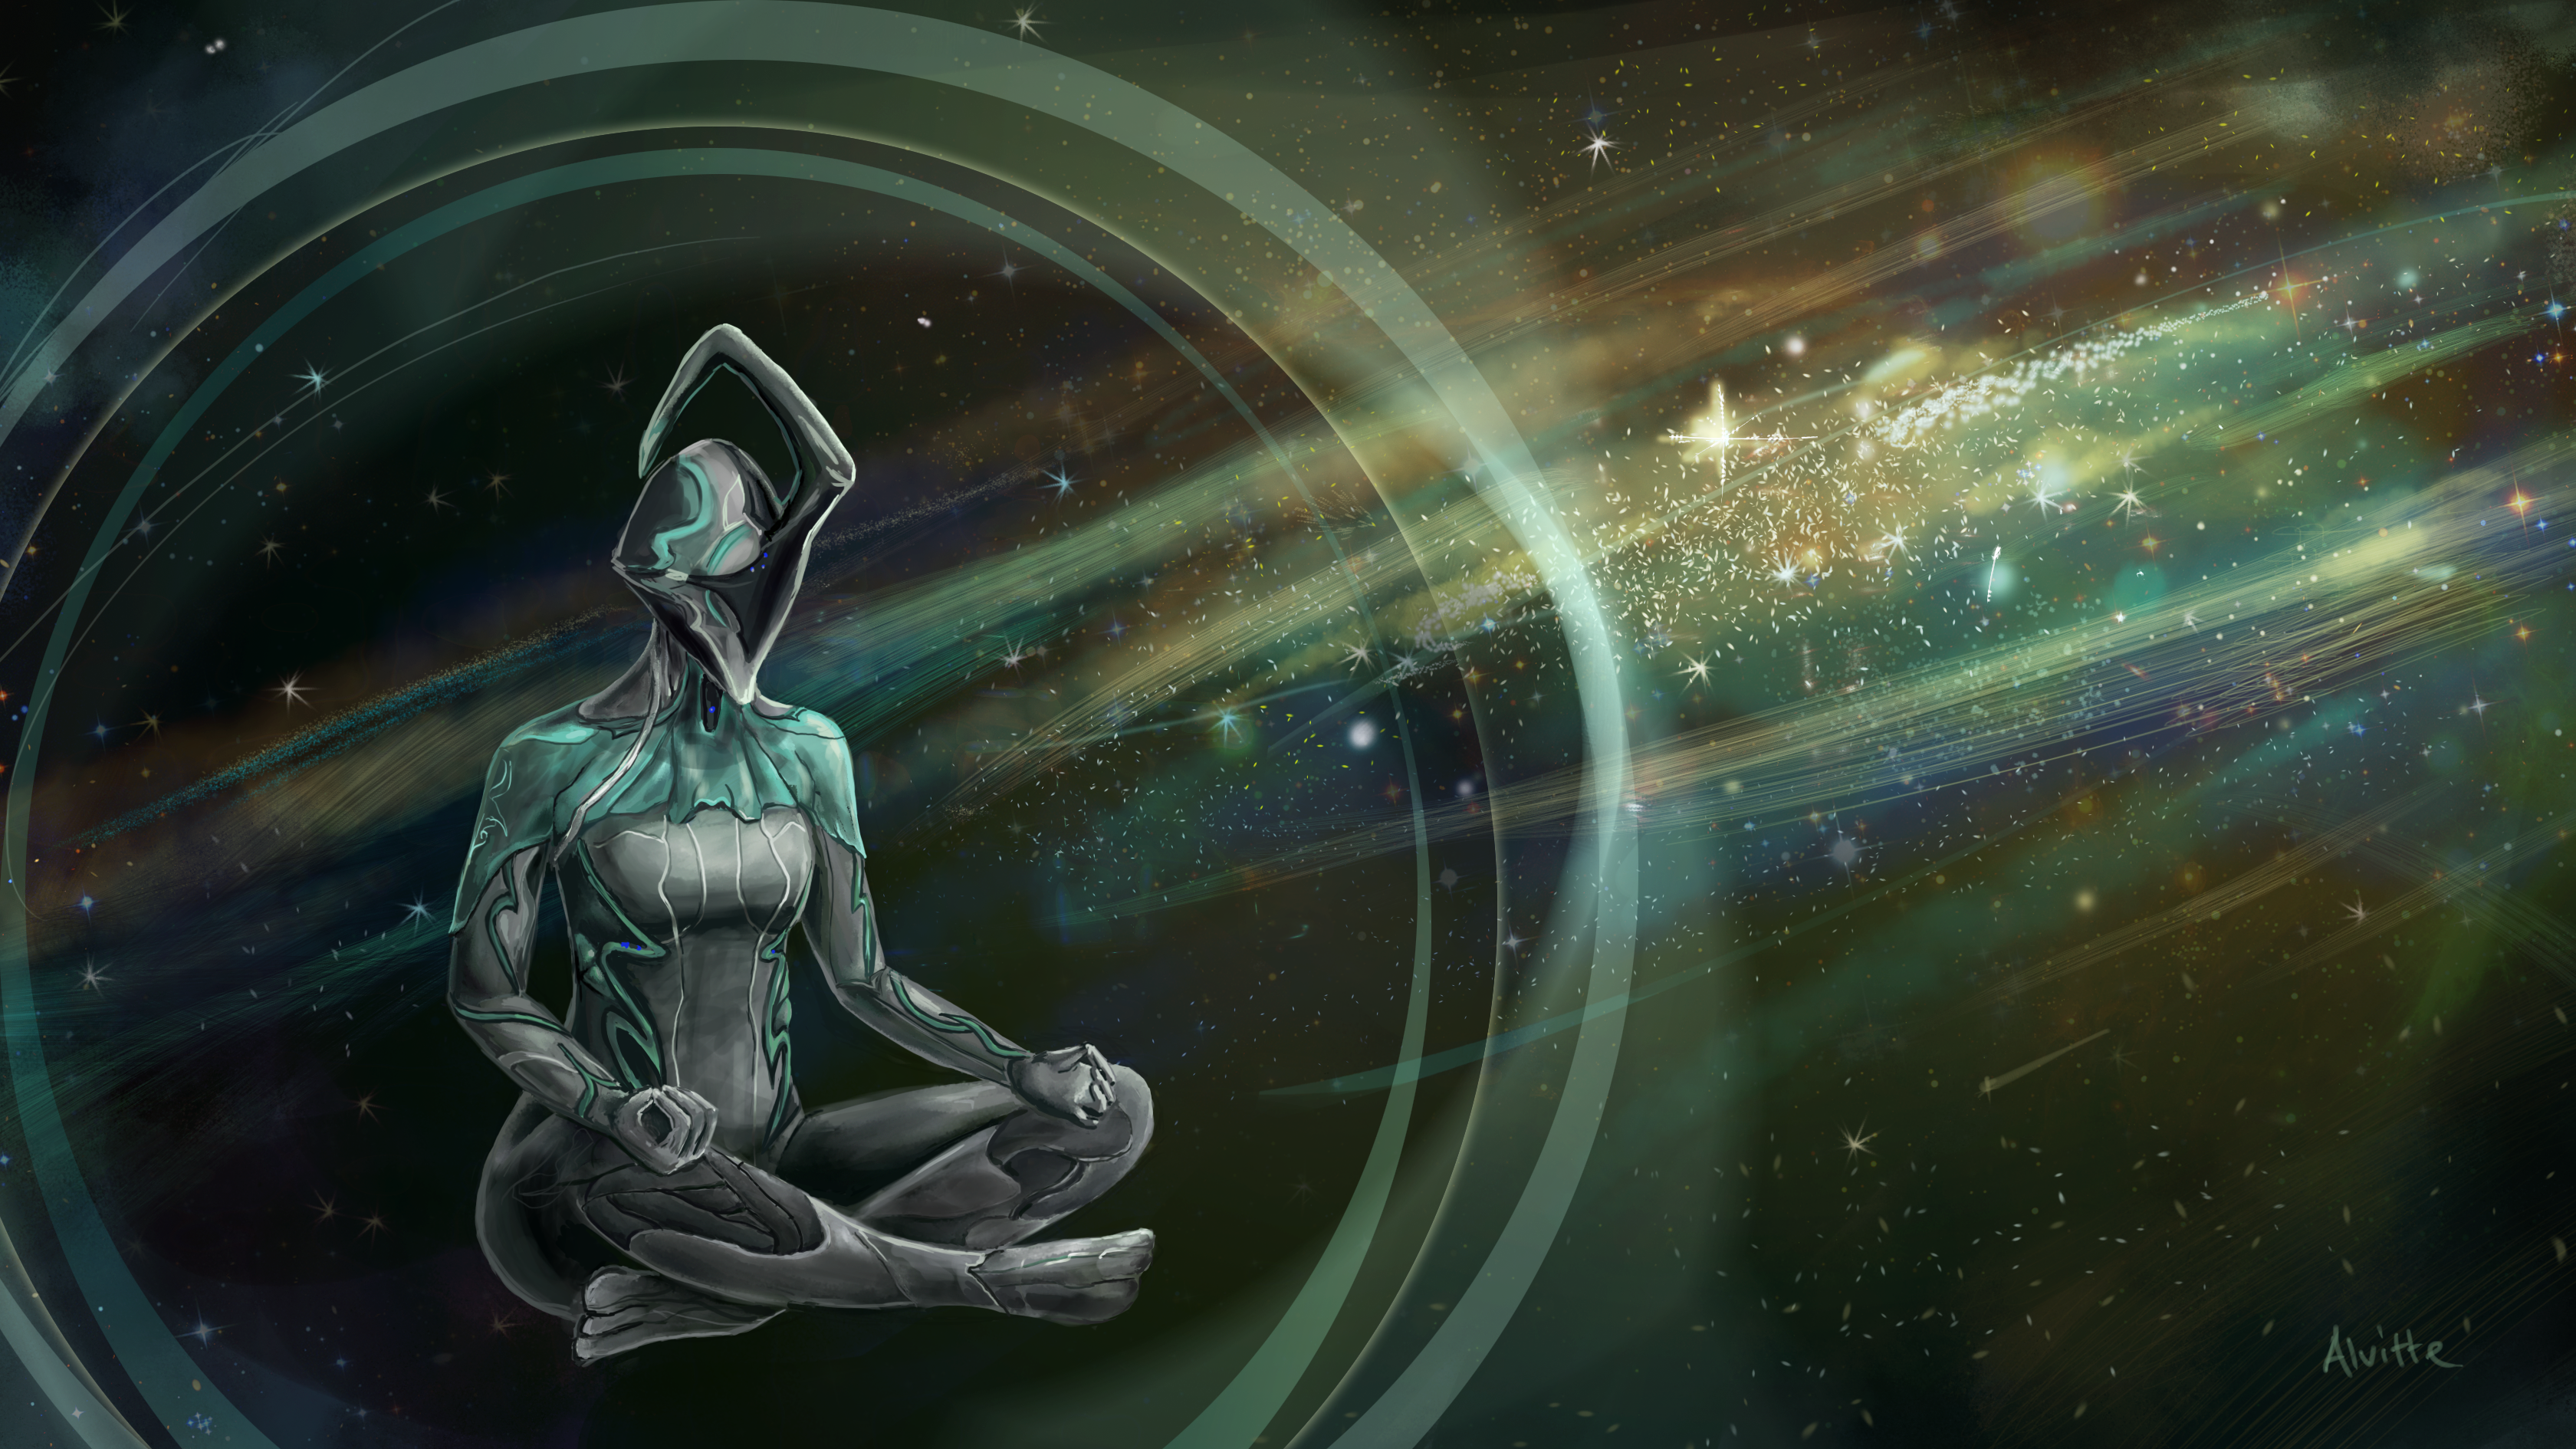 nyx__warframe__by_alvitte-d813bna.png